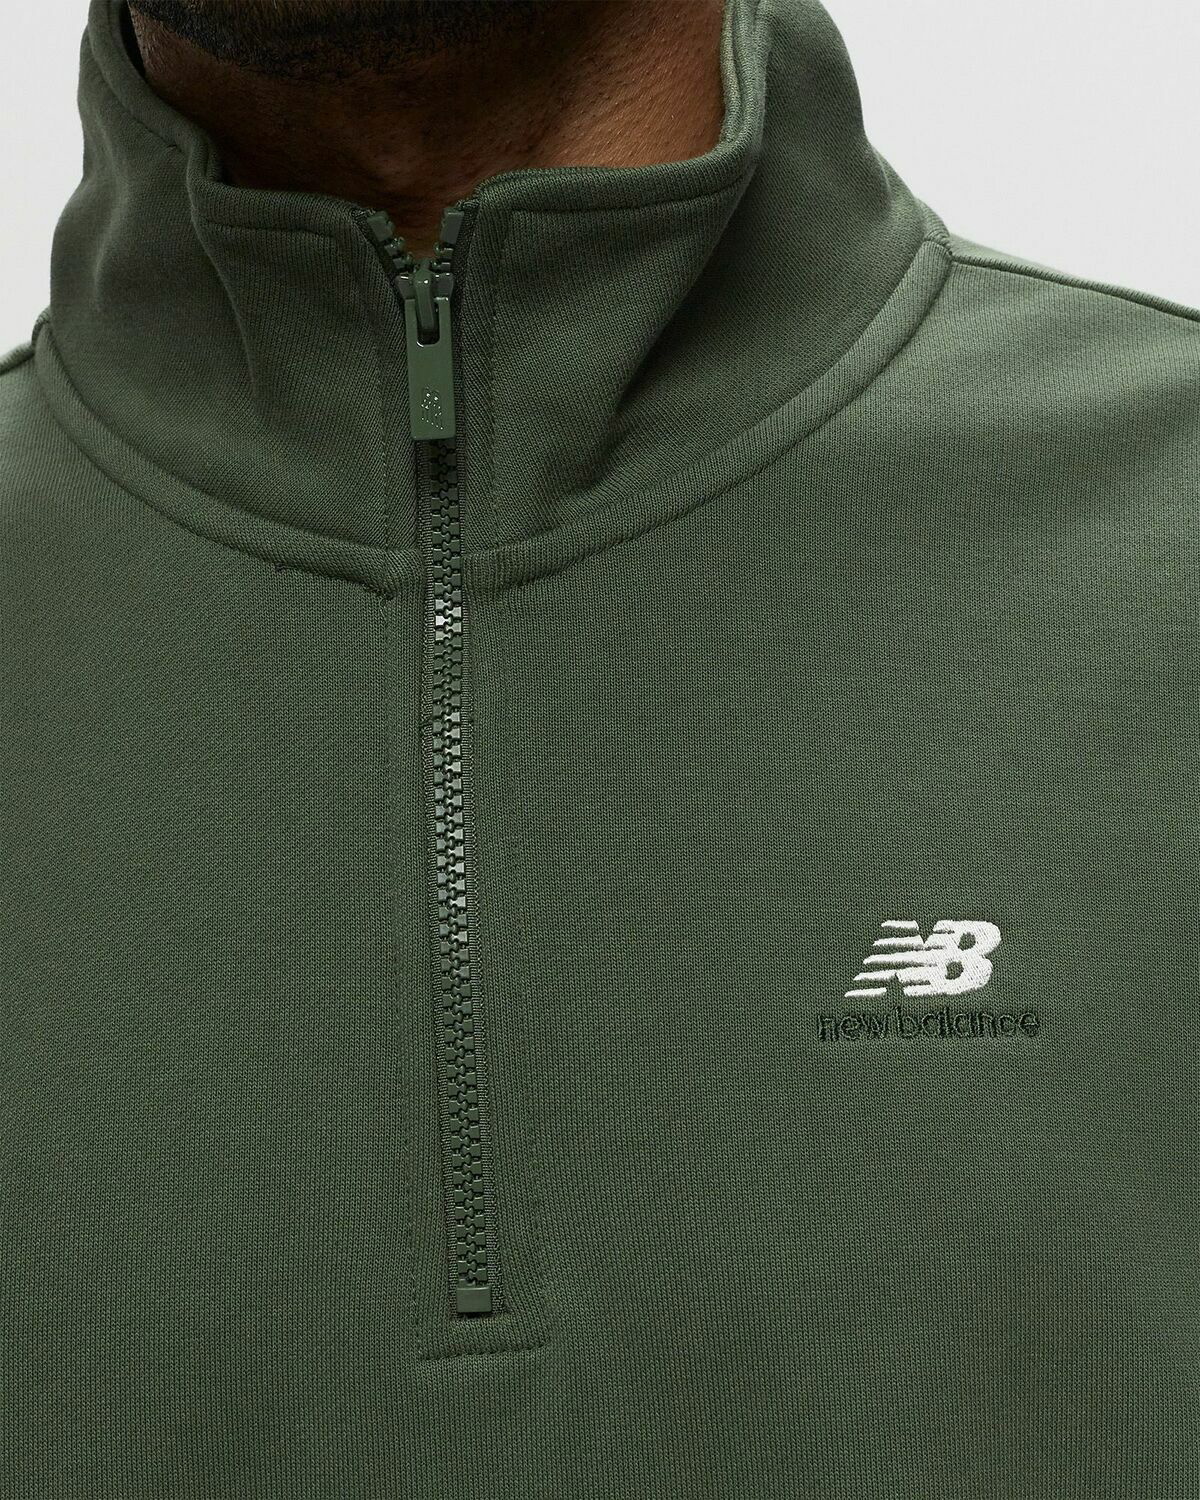 New Balance Athletics Remastered French Terry 1/4 Zip Green - Mens